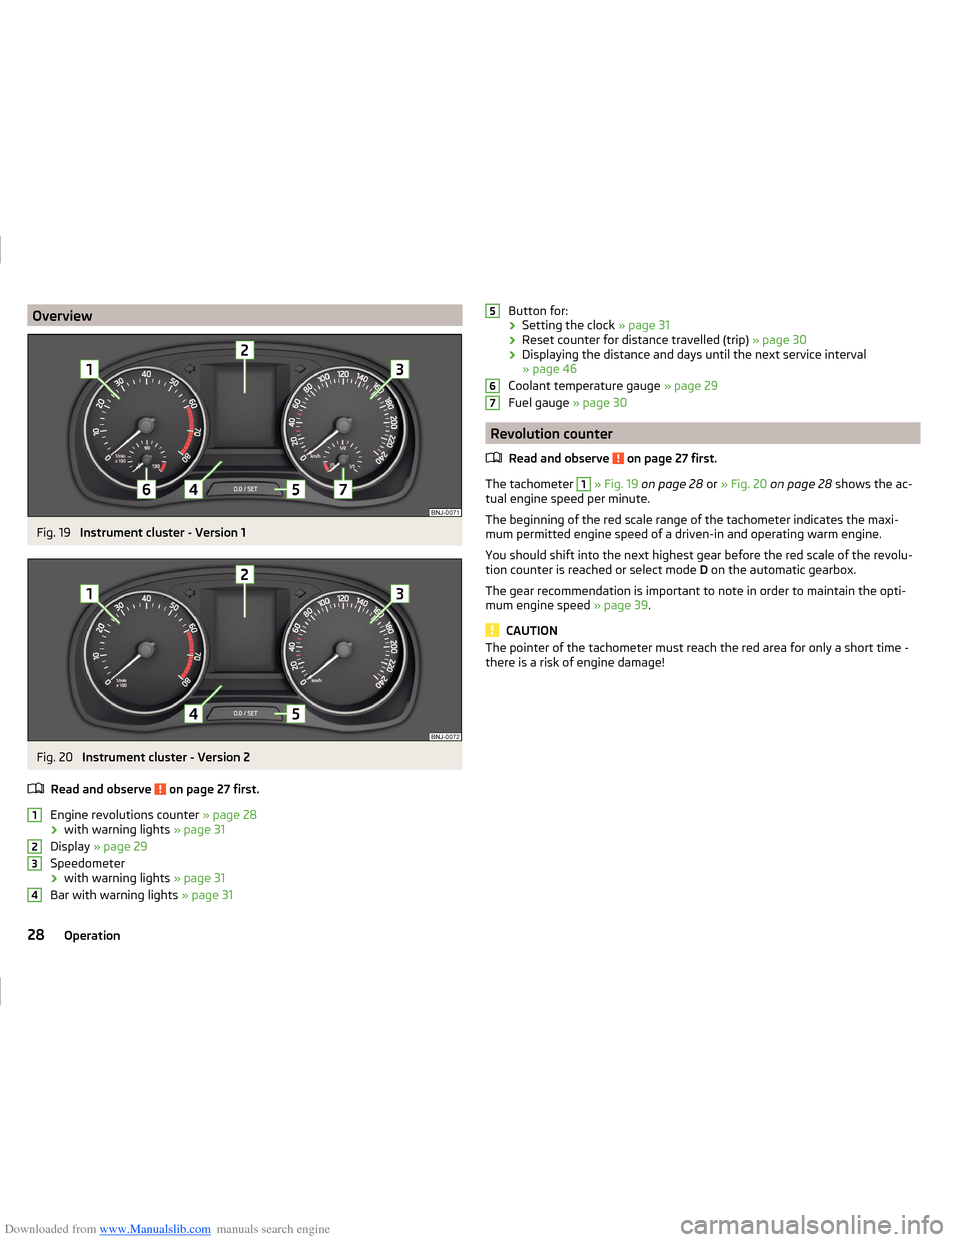 SKODA FABIA 2014 3.G / NJ Operating Instruction Manual Downloaded from www.Manualslib.com manuals search engine OverviewFig. 19 
Instrument cluster - Version 1
Fig. 20 
Instrument cluster - Version 2
Read and observe 
 on page 27 first.
Engine revolutions